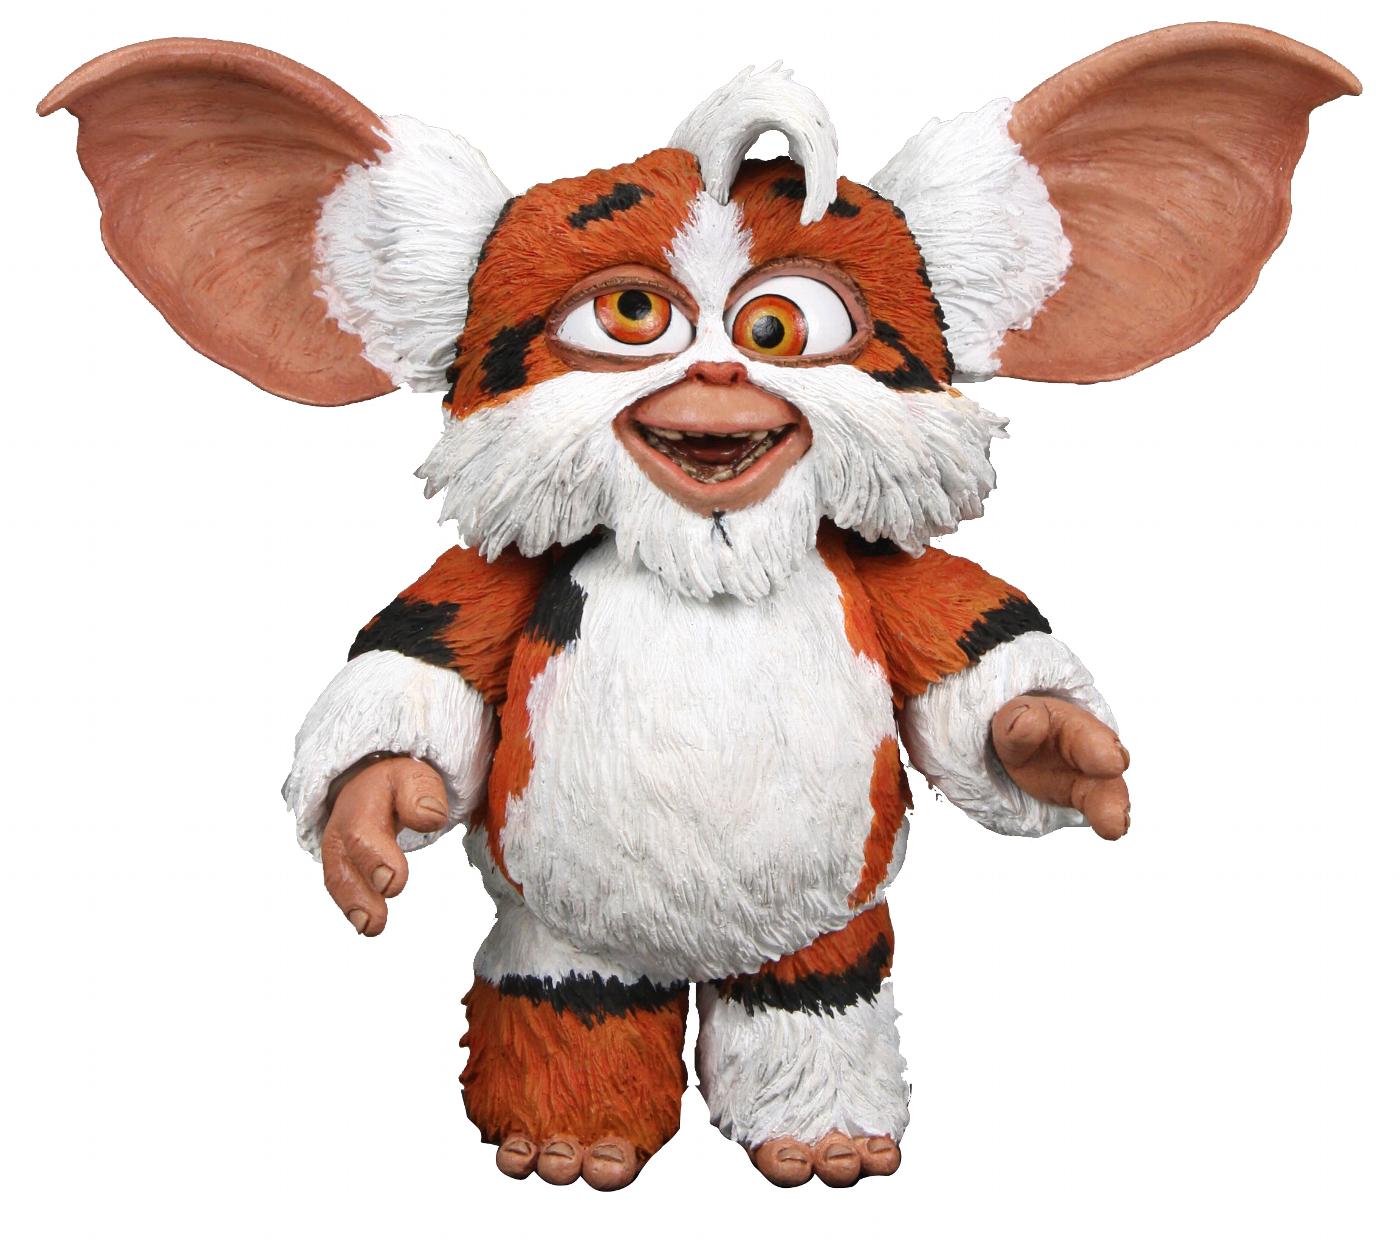 Daffy The Mogwai Blister Card Figure from Gremlins 2 The New Batch.